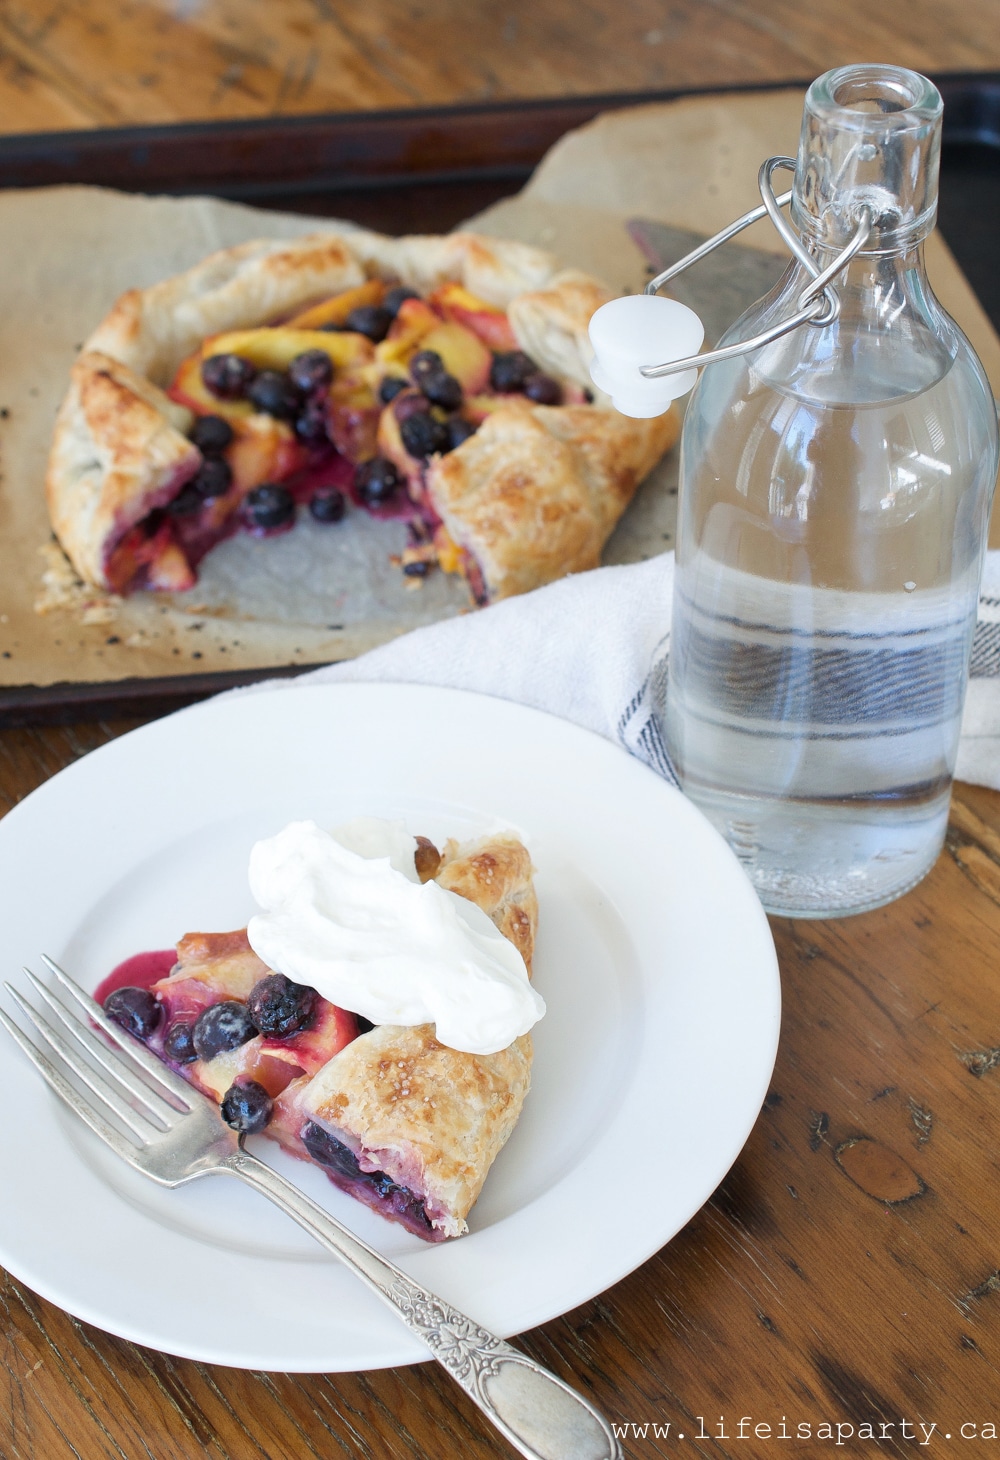 Nectarine and Blueberry Galette with whipped cream